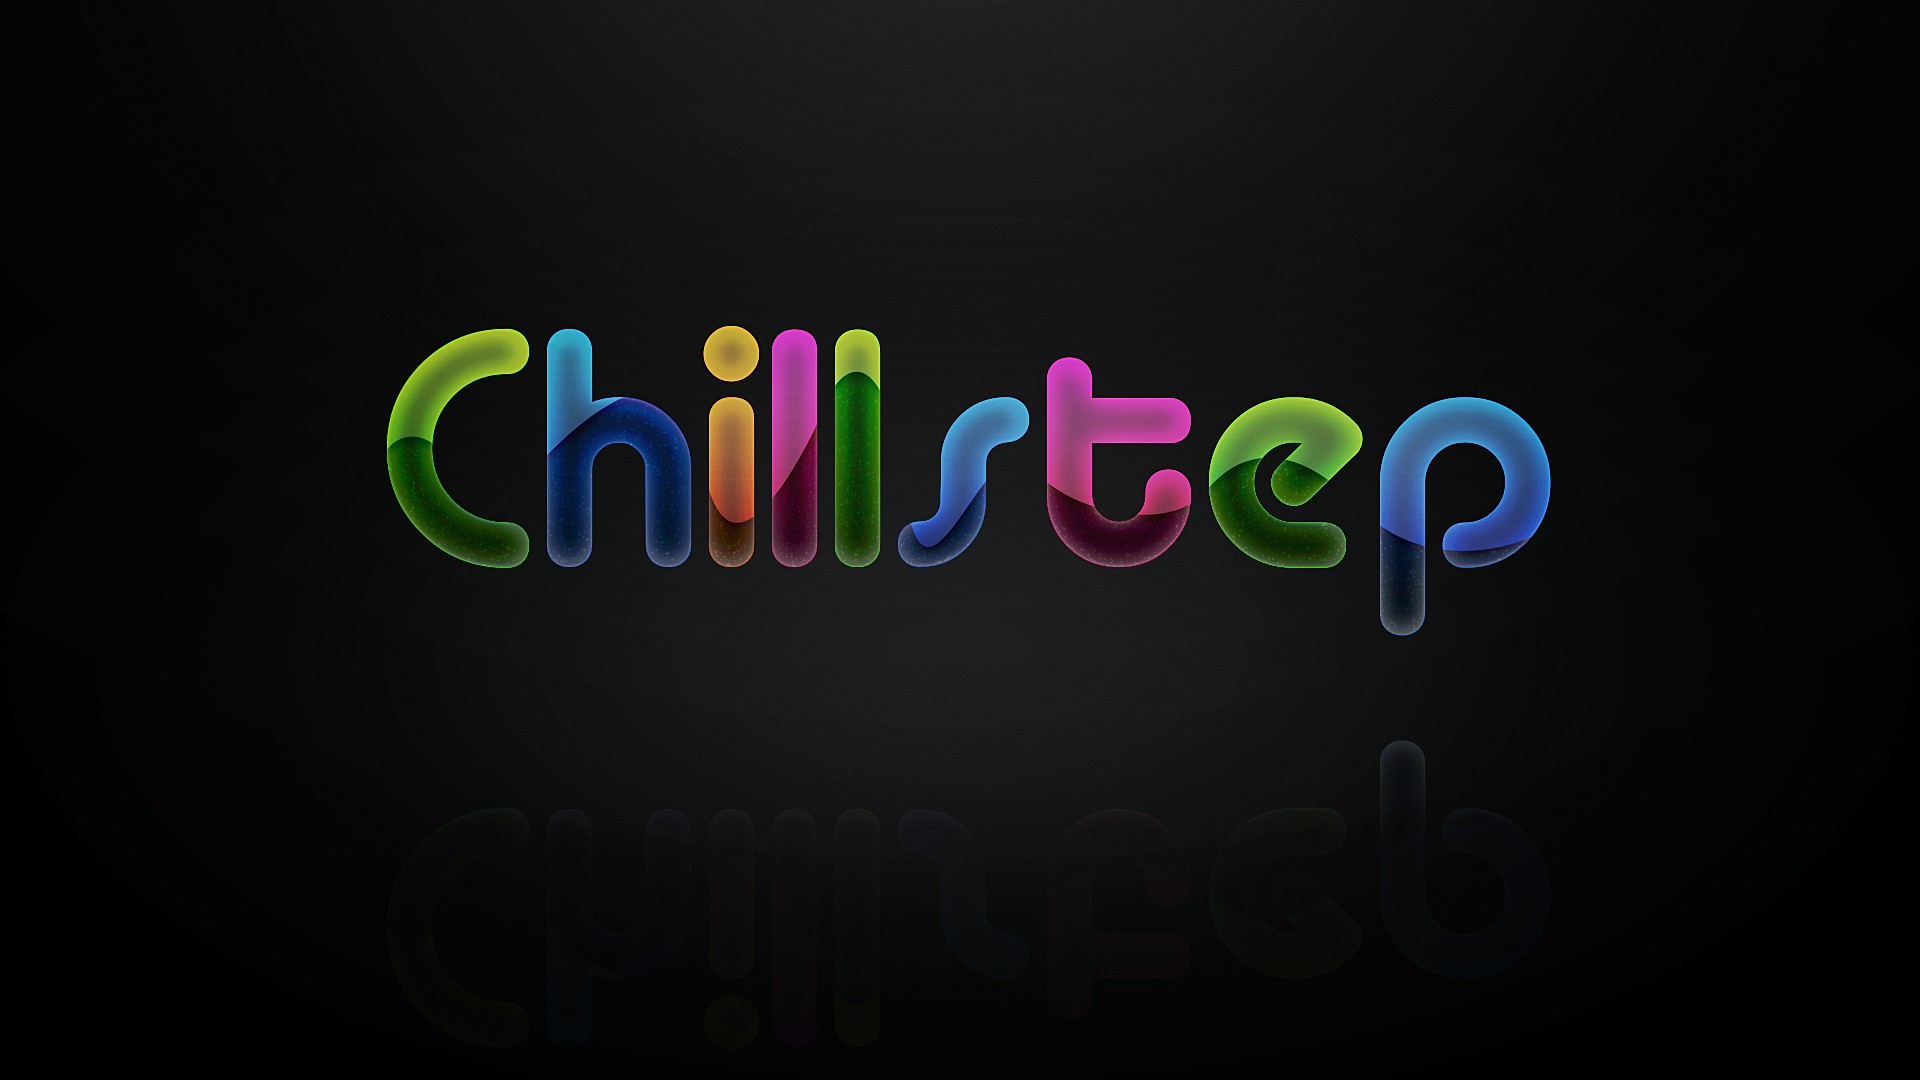 neon, Typography, Chillstep, Colorful, Digital art Wallpaper